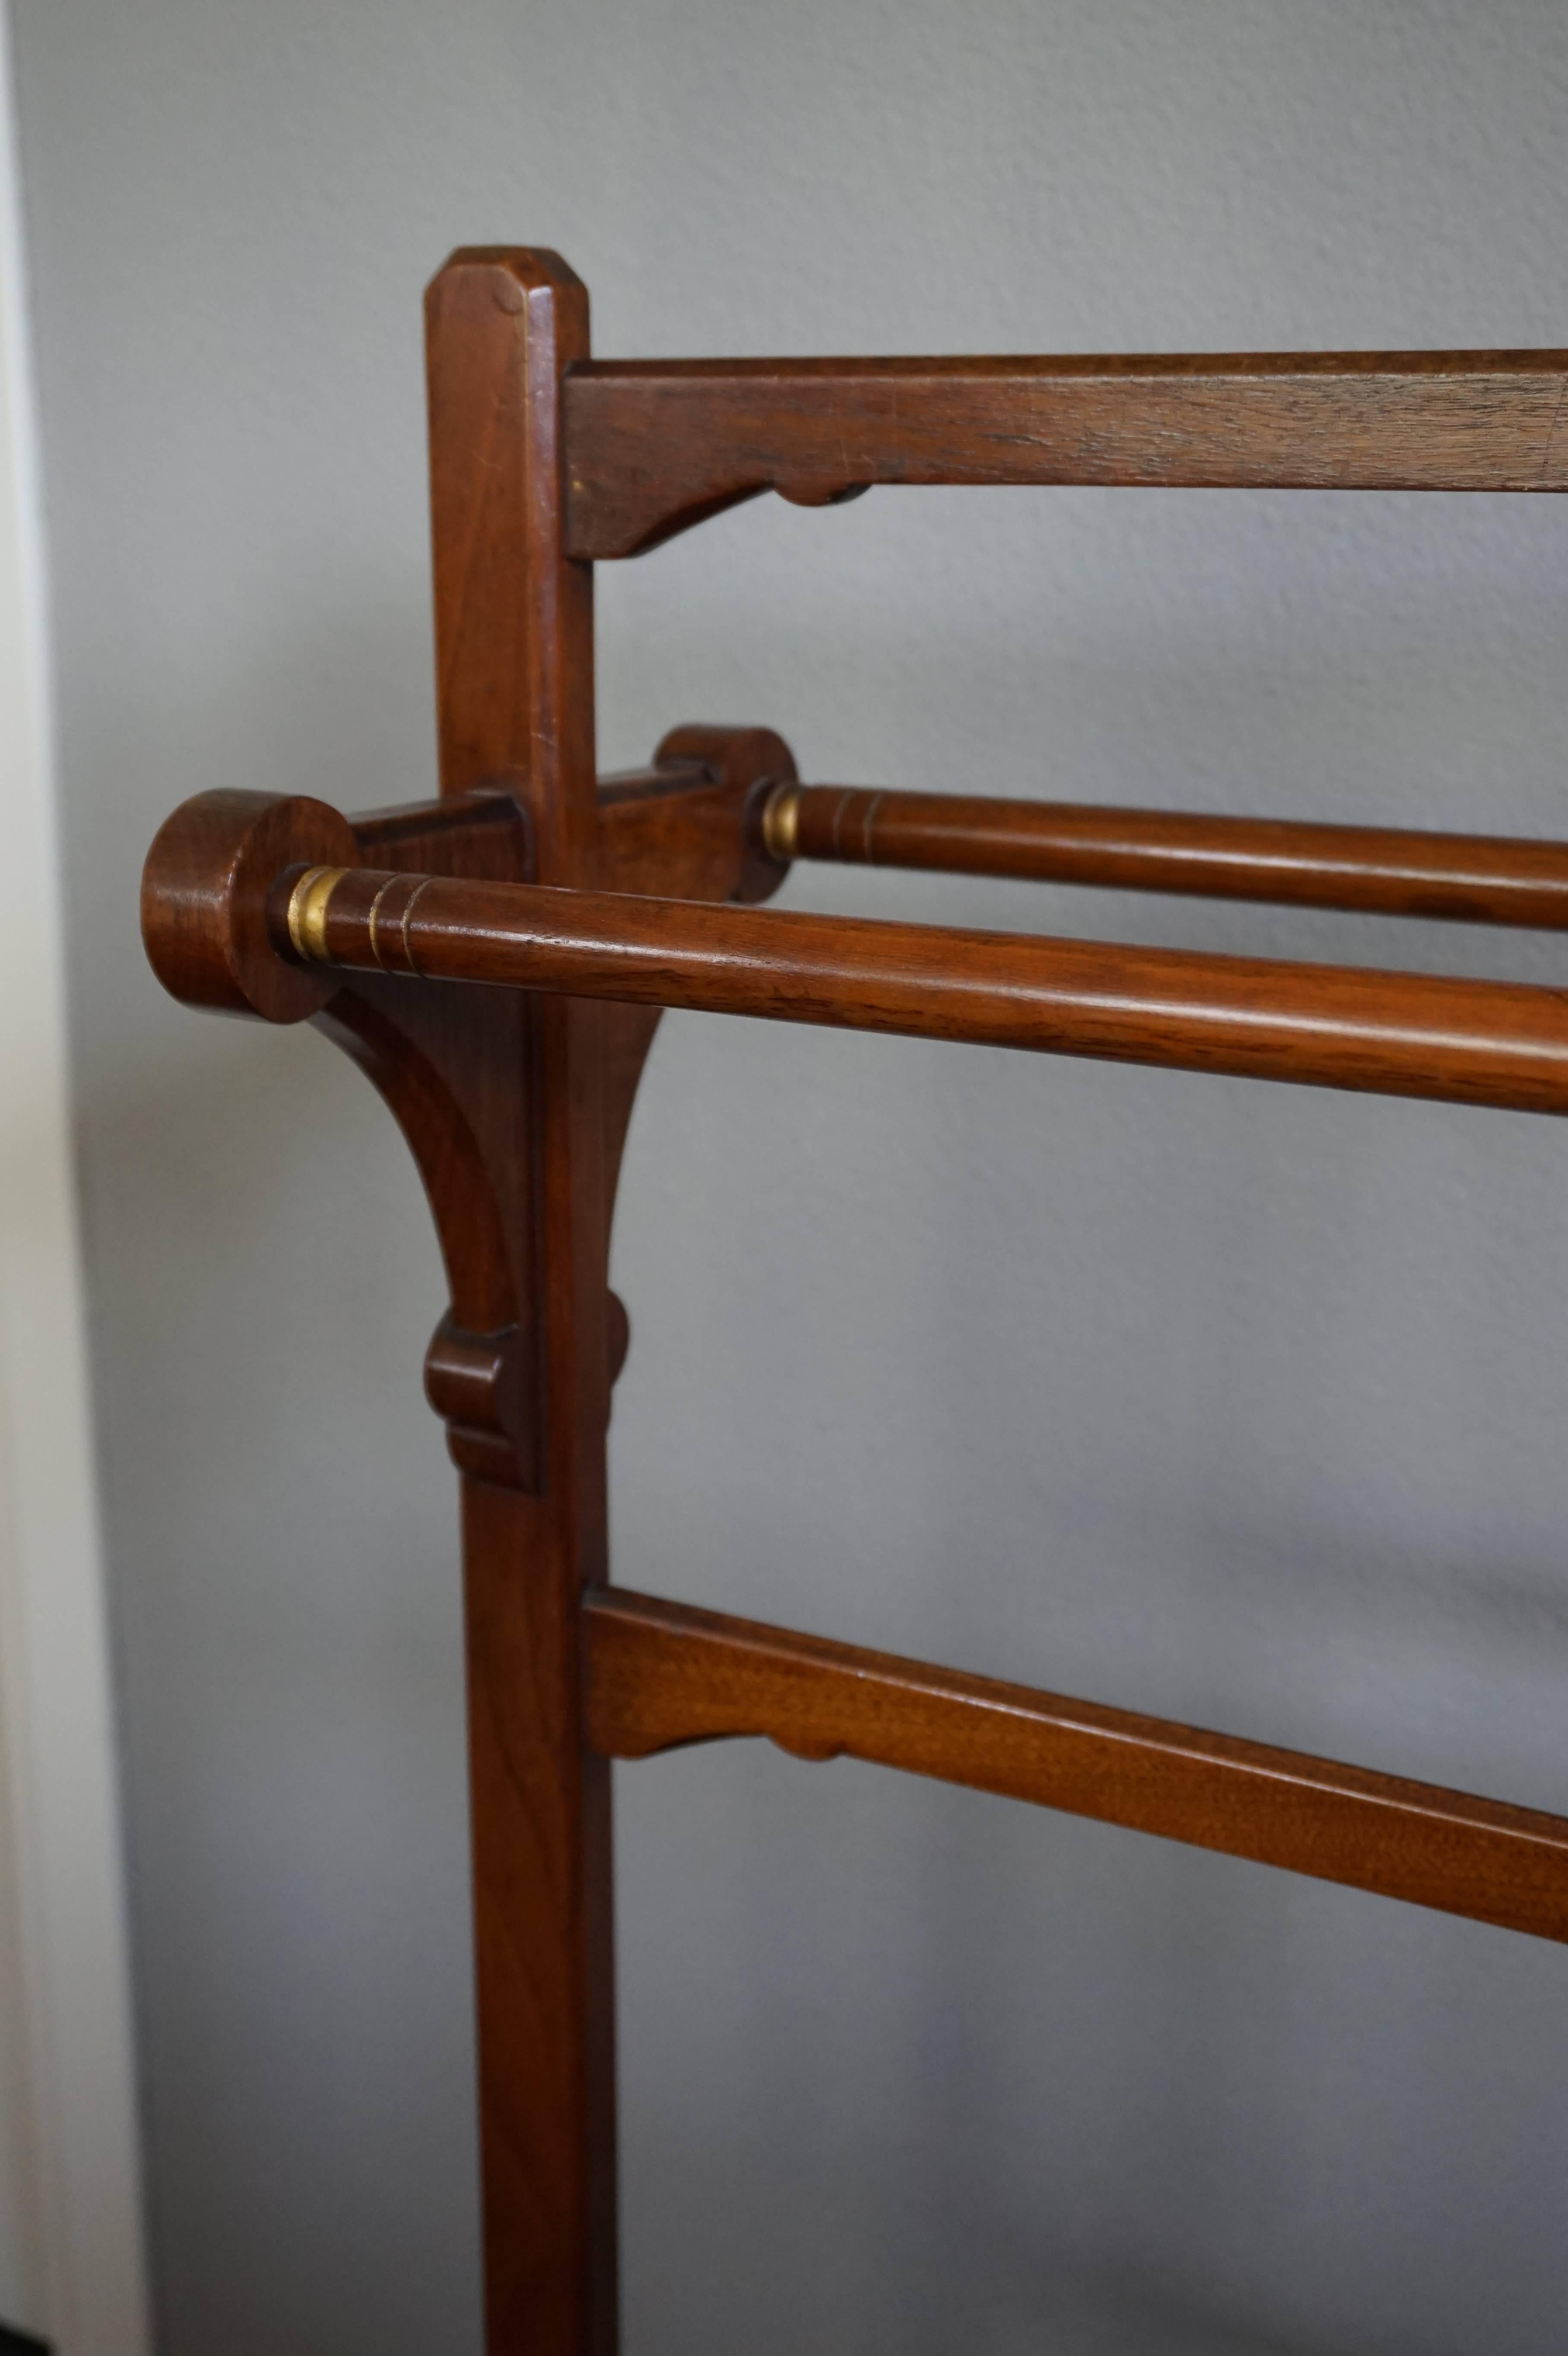 Aesthetic Movement Arts & Crafts Walnut Towel Rack by Gillow & Co Attributed to Bruce James Talbert